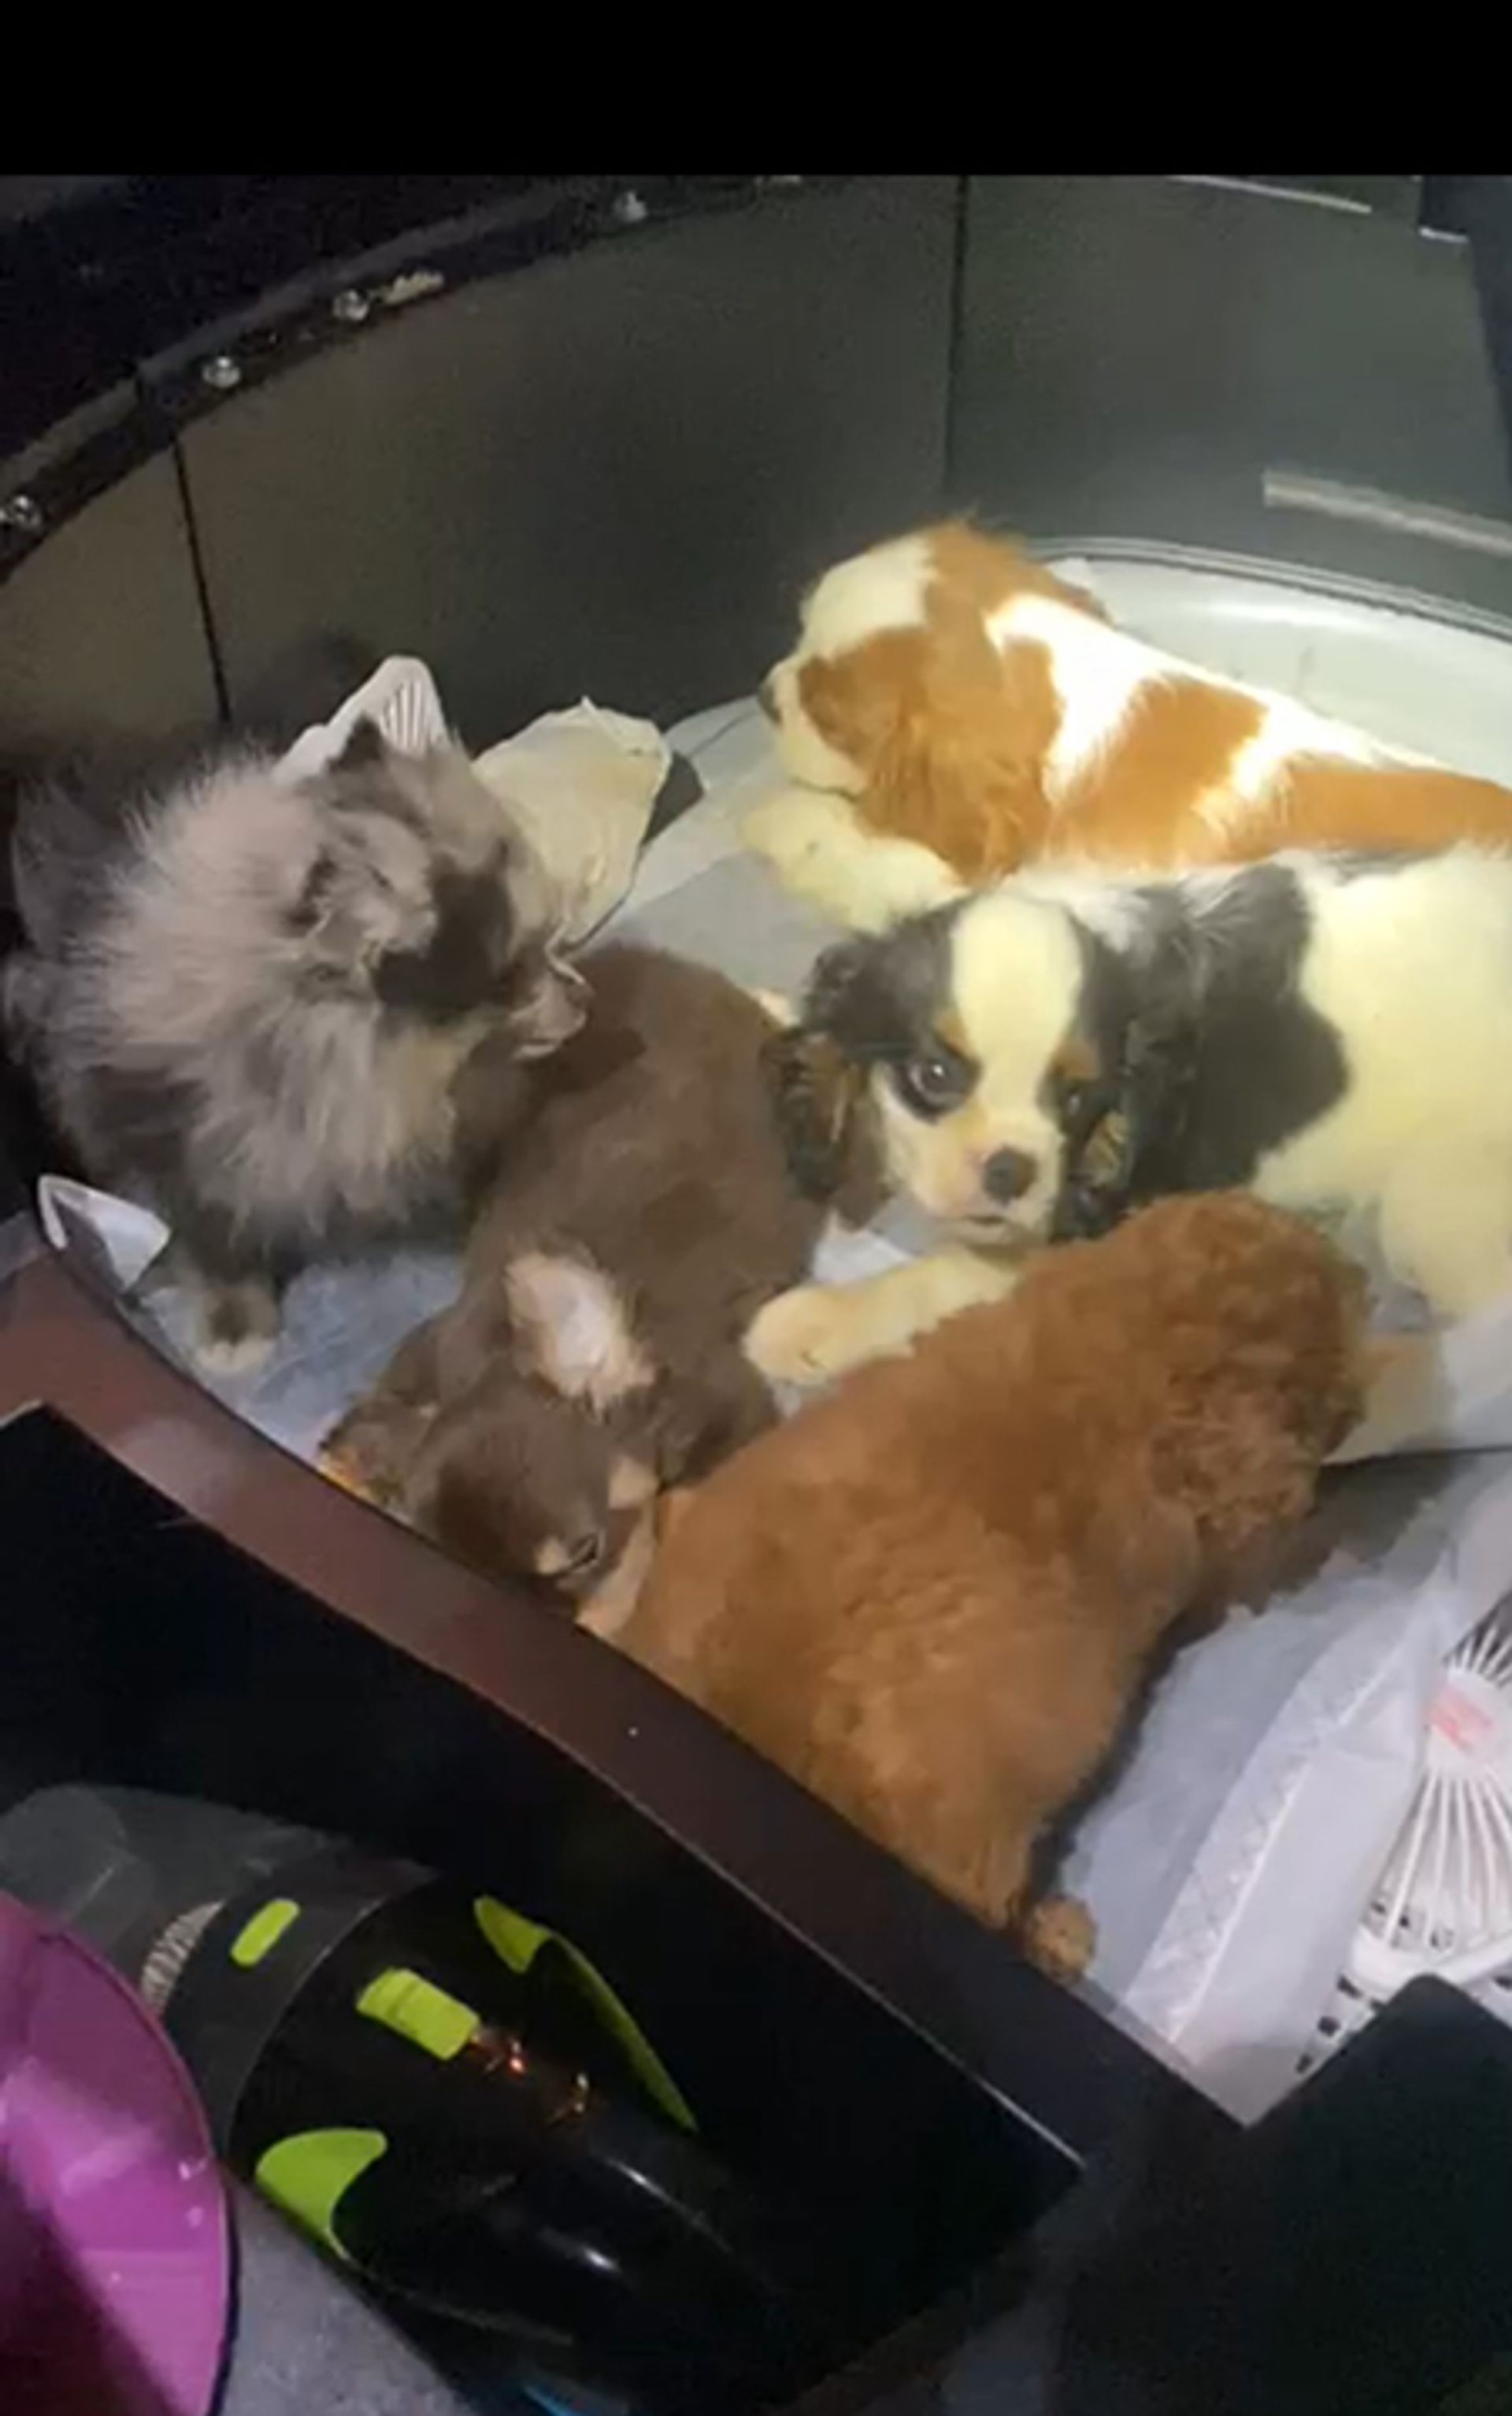 Sedated puppies and a kitten were found hidden in different sections of a vehicle in February. PHOTO: NPARKS